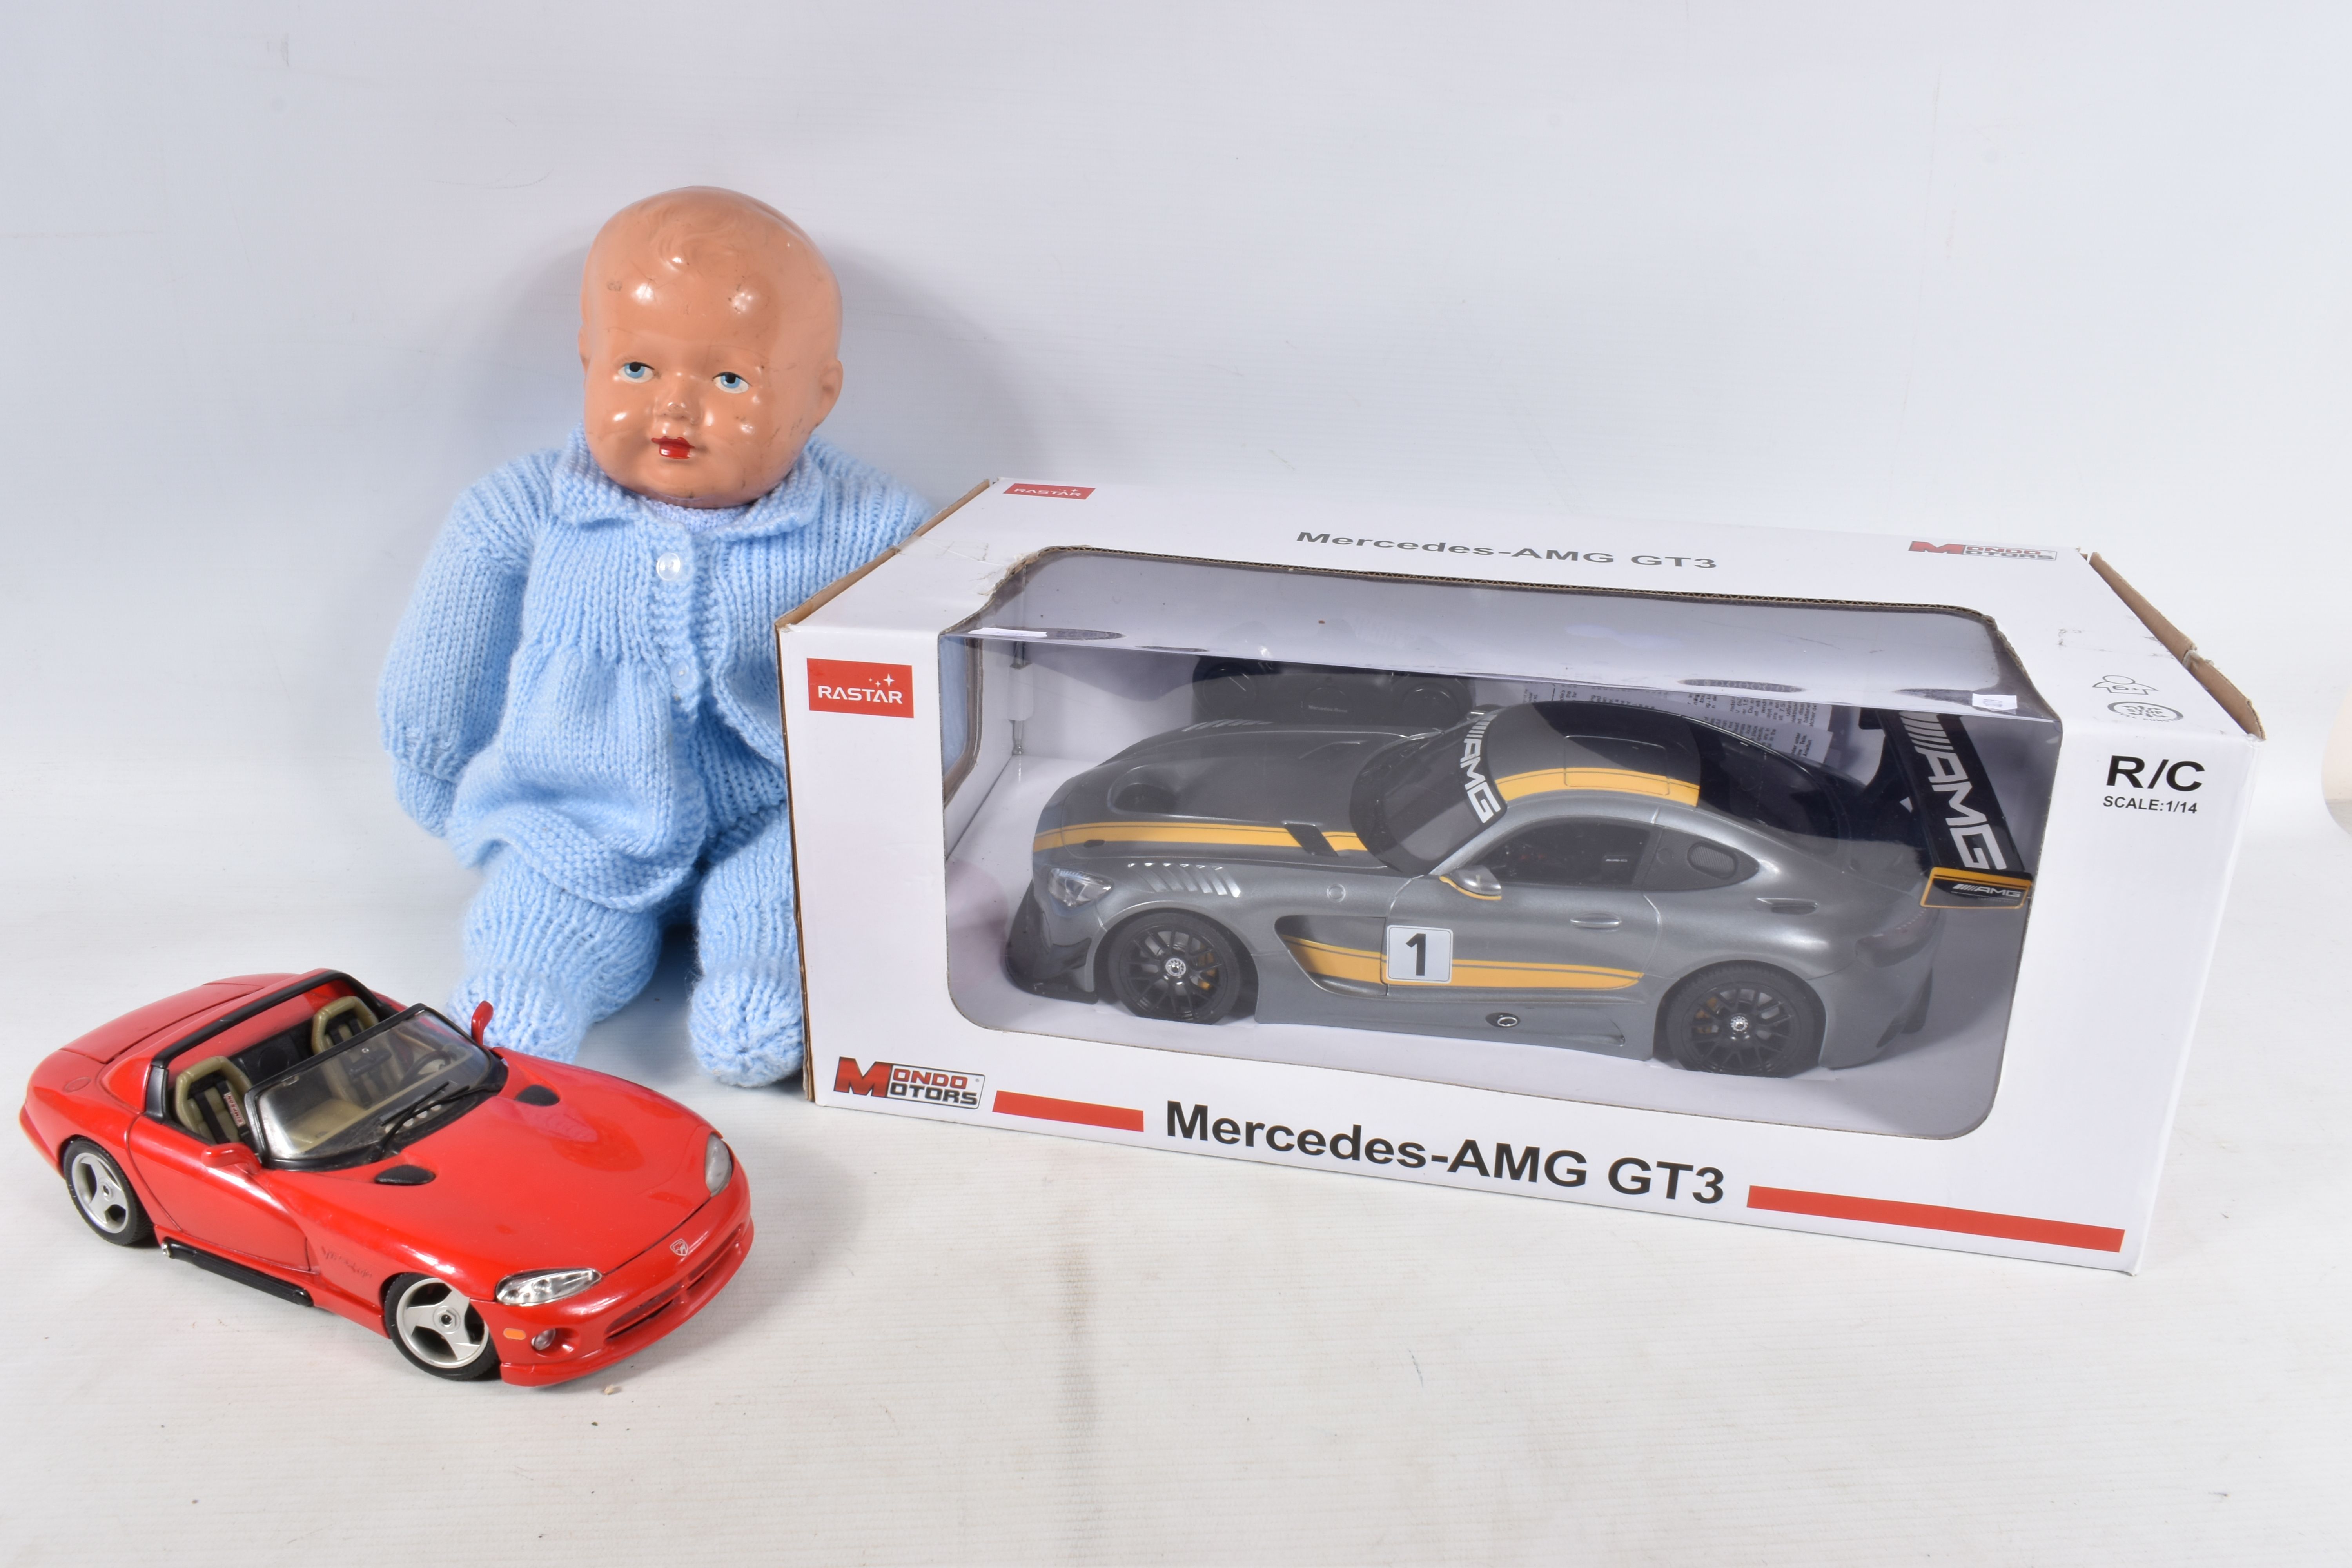 A BOXED RASTAR MONDO MOTORS RADIO CONTROL MERCEDES-AMG GT3 RACING CAR, 1/14 scale, not tested but